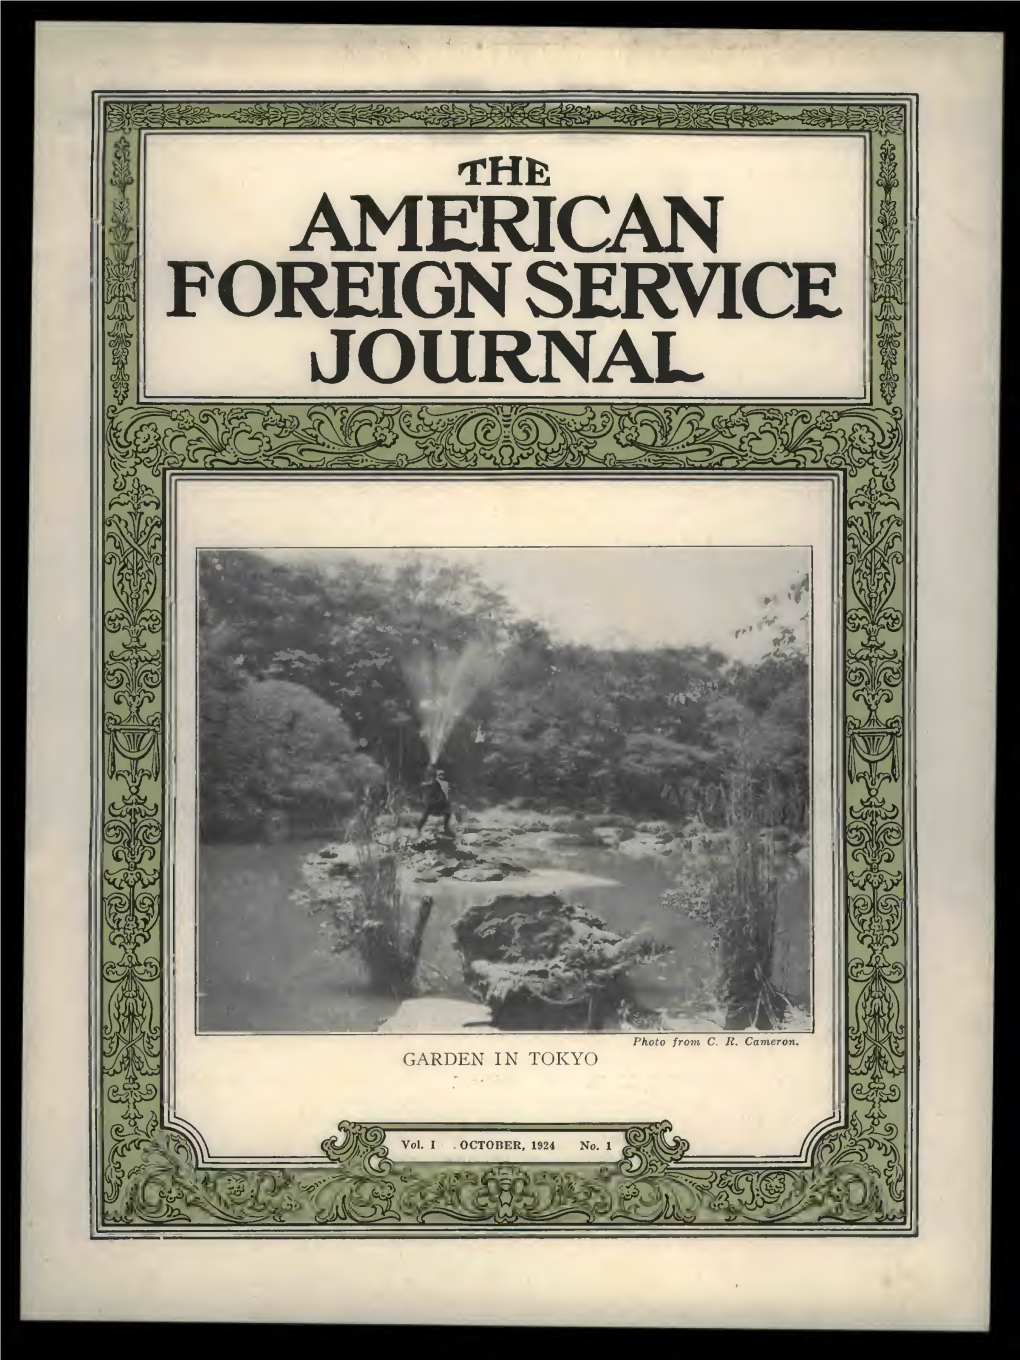 The Foreign Service Journal, October 1924